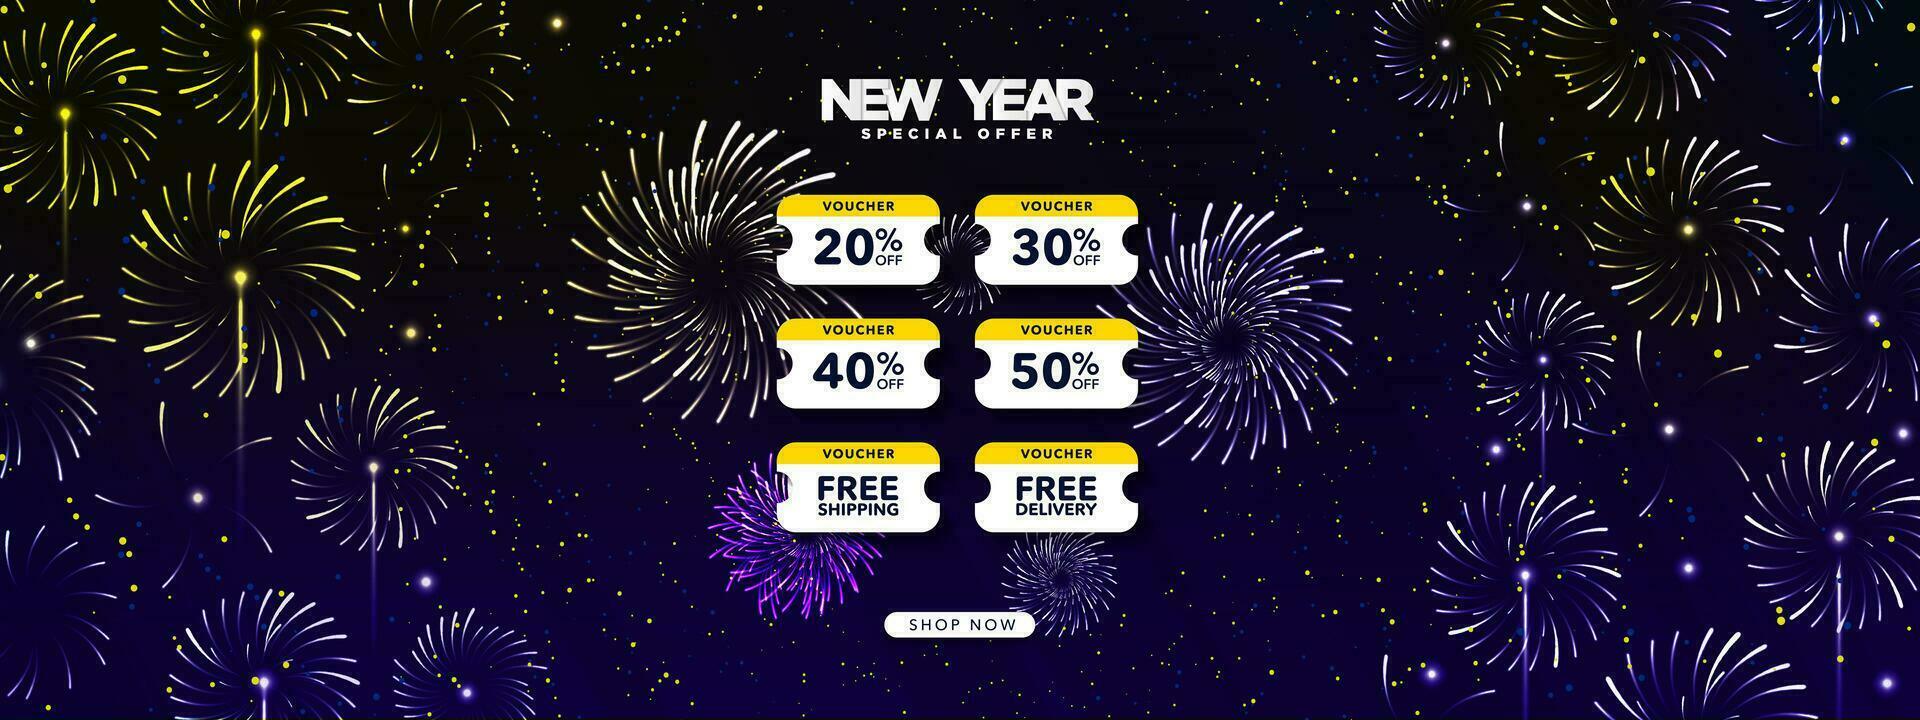 New Year Special Offer 50 Discount Voucher Template Banner with Shop Now CTA button and fireworks display. New Year Coupon Banner layout. Editable Vector Illustration. EPS 10.